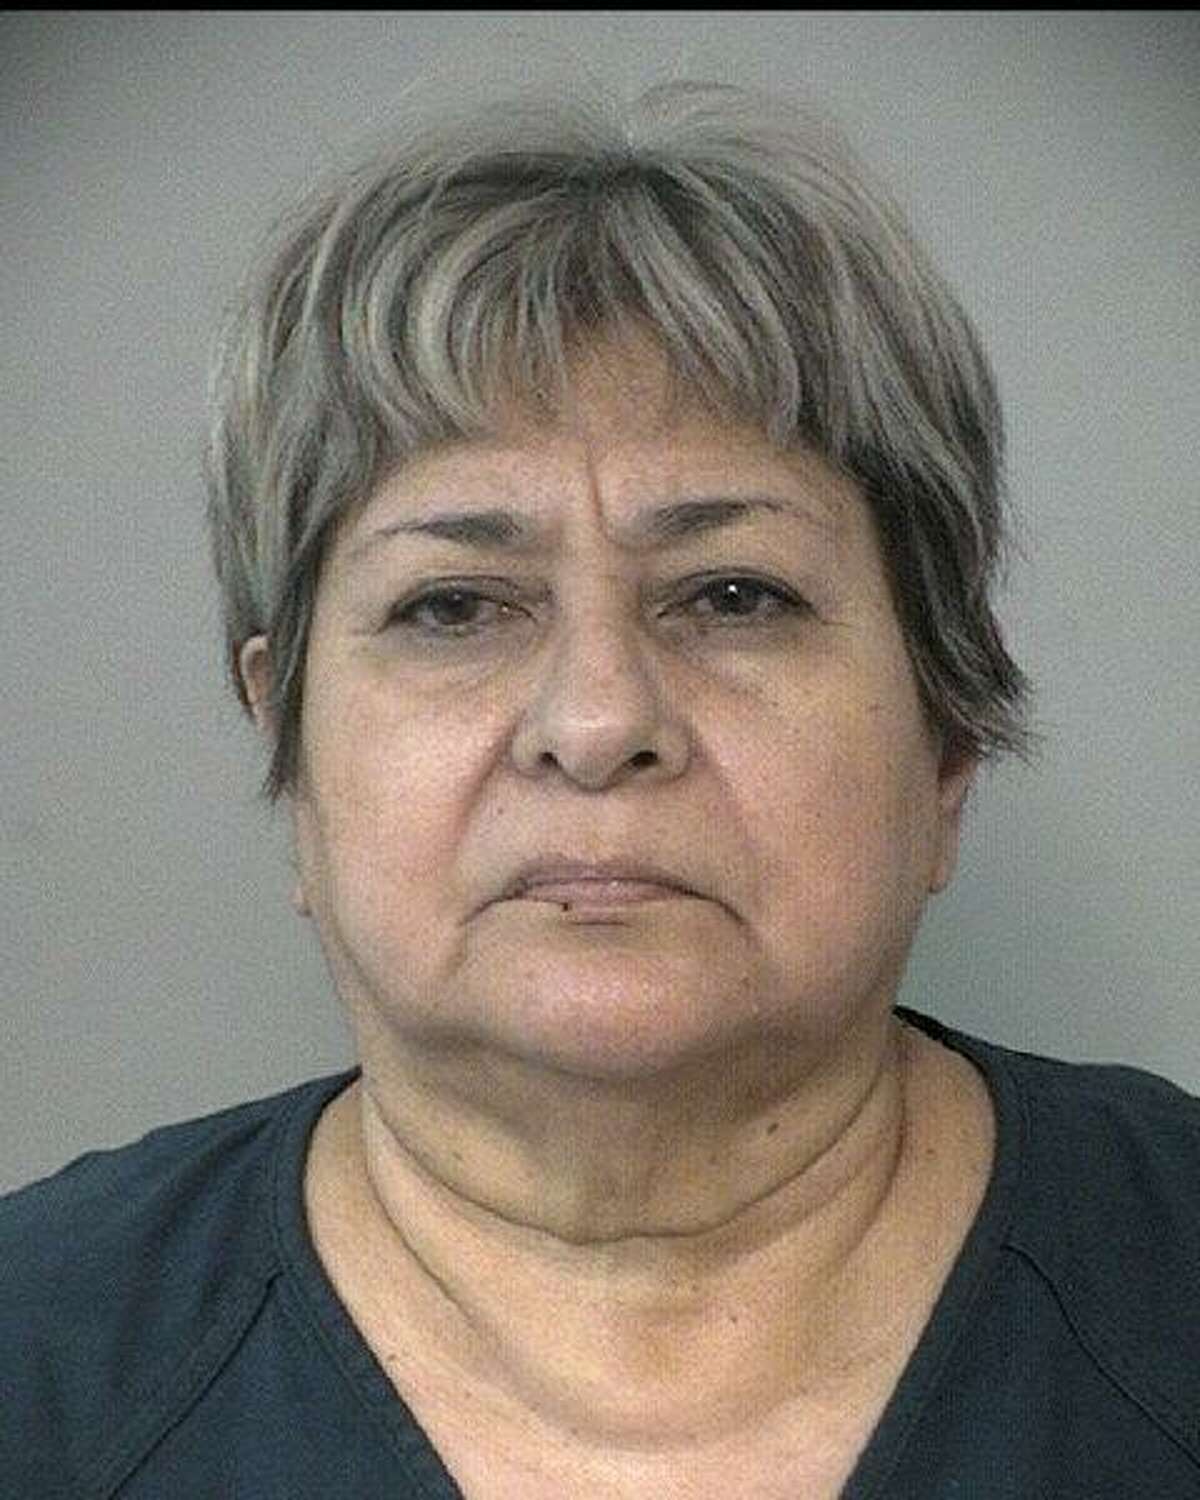 Sandra Perez, 65, of Mission, Texas, has been arrested and booked into the Fort Bend County Jail on a first-degree felony charge of manufacturing/delivery of a controlled substance and a second-degree felony charge of unlawful use of a criminal instrument.